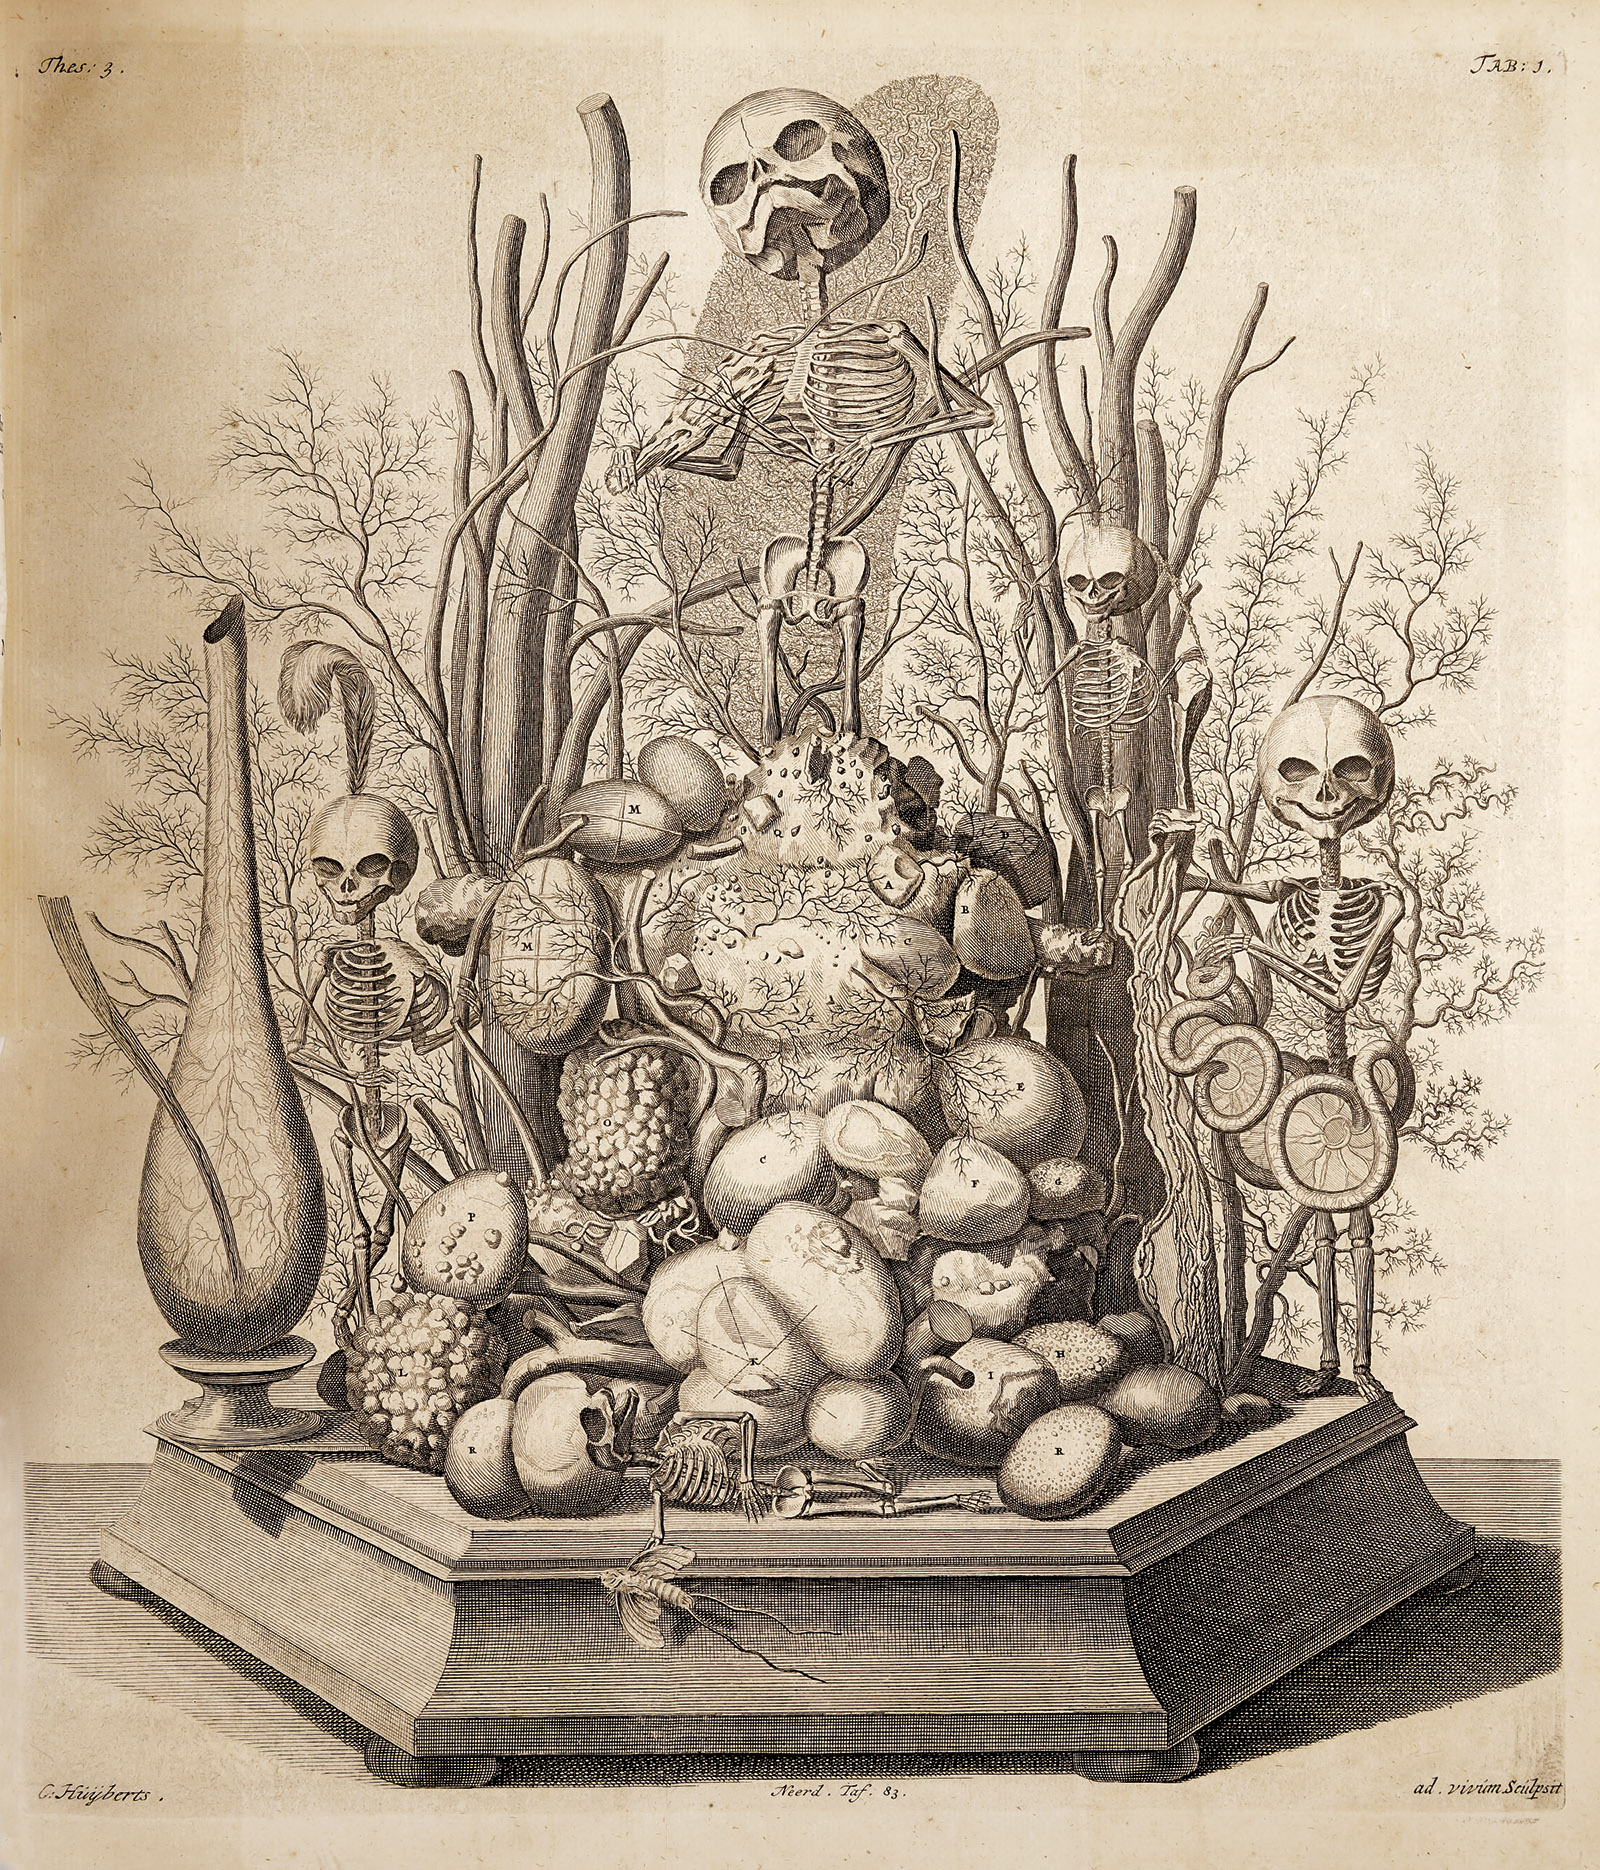 Engraving of an allegorical tableau by Frederik Ruysch composed of human fetal skeletons, kidney stones, bladder tissue, and other organic material